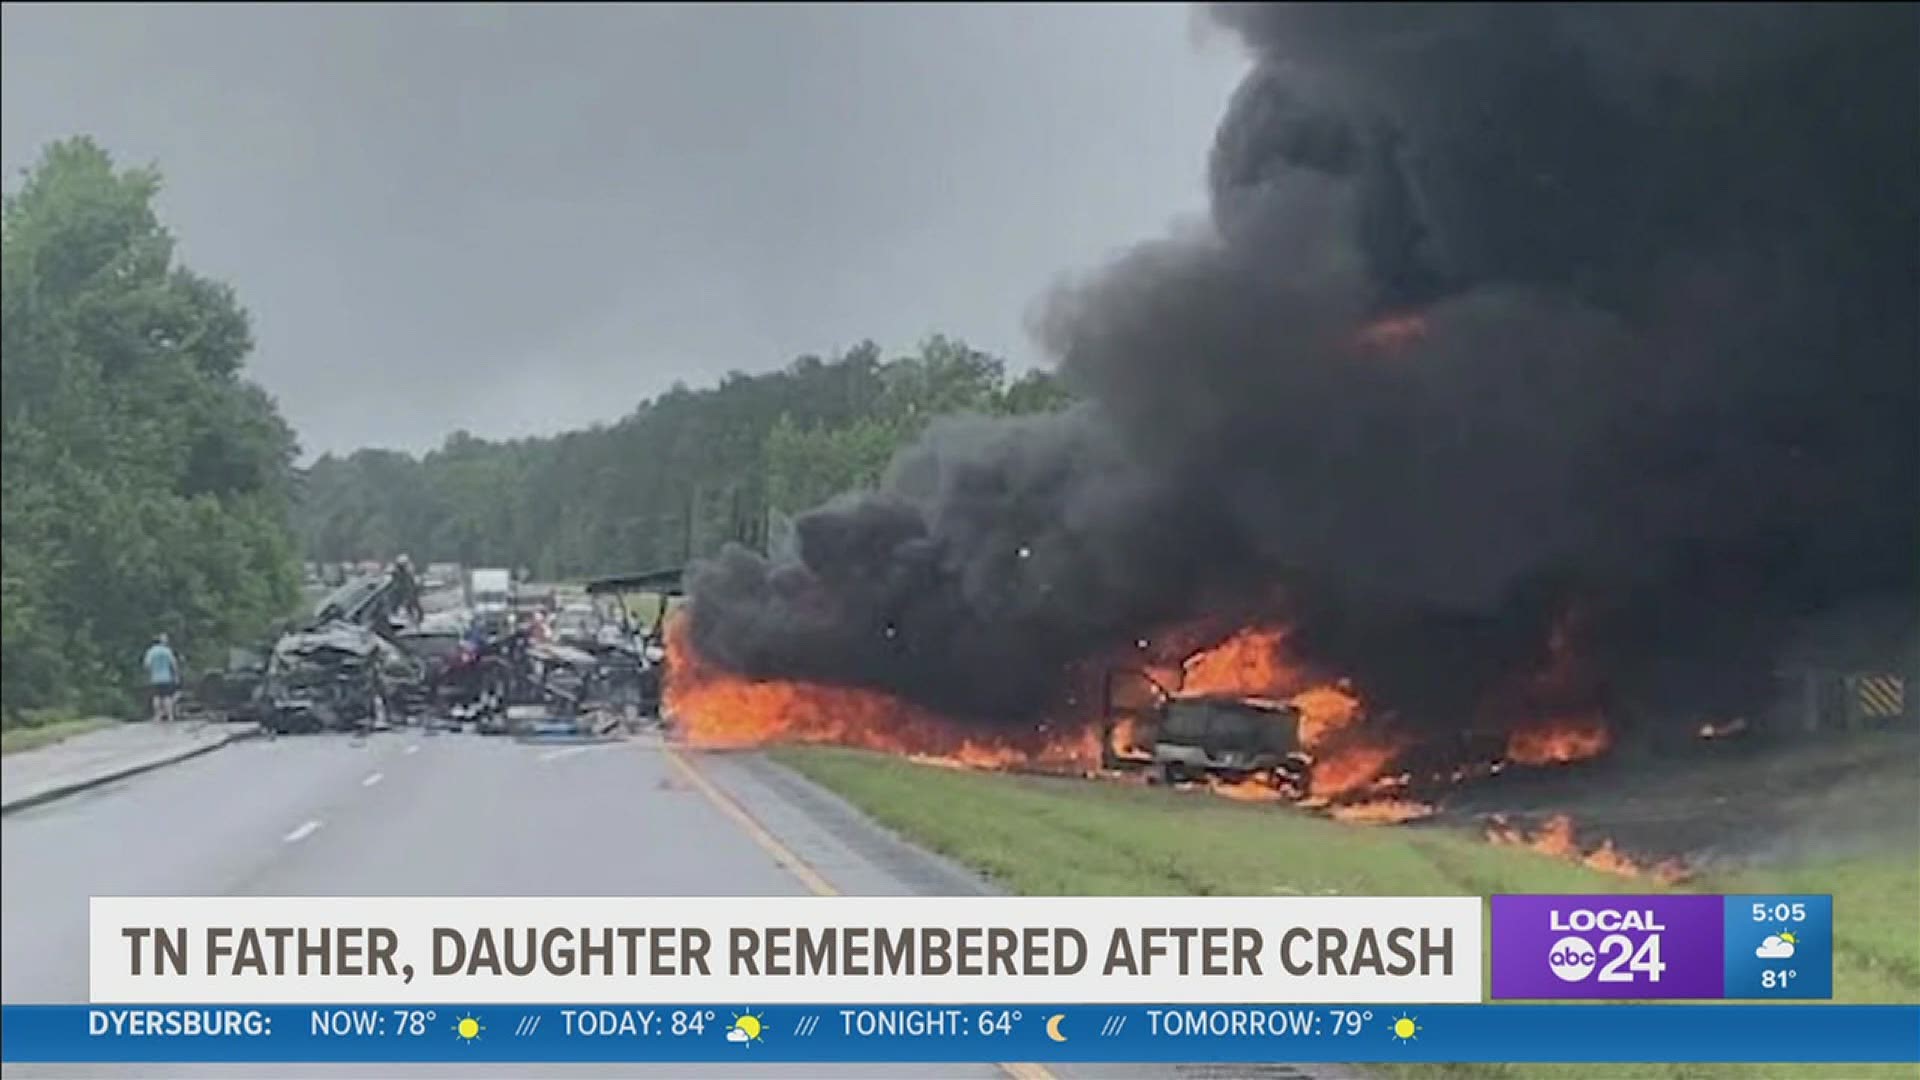 Cody Fox and his 9-month-old daughter Ariana were among 10 people killed in an accident in Butler County, Alabama.